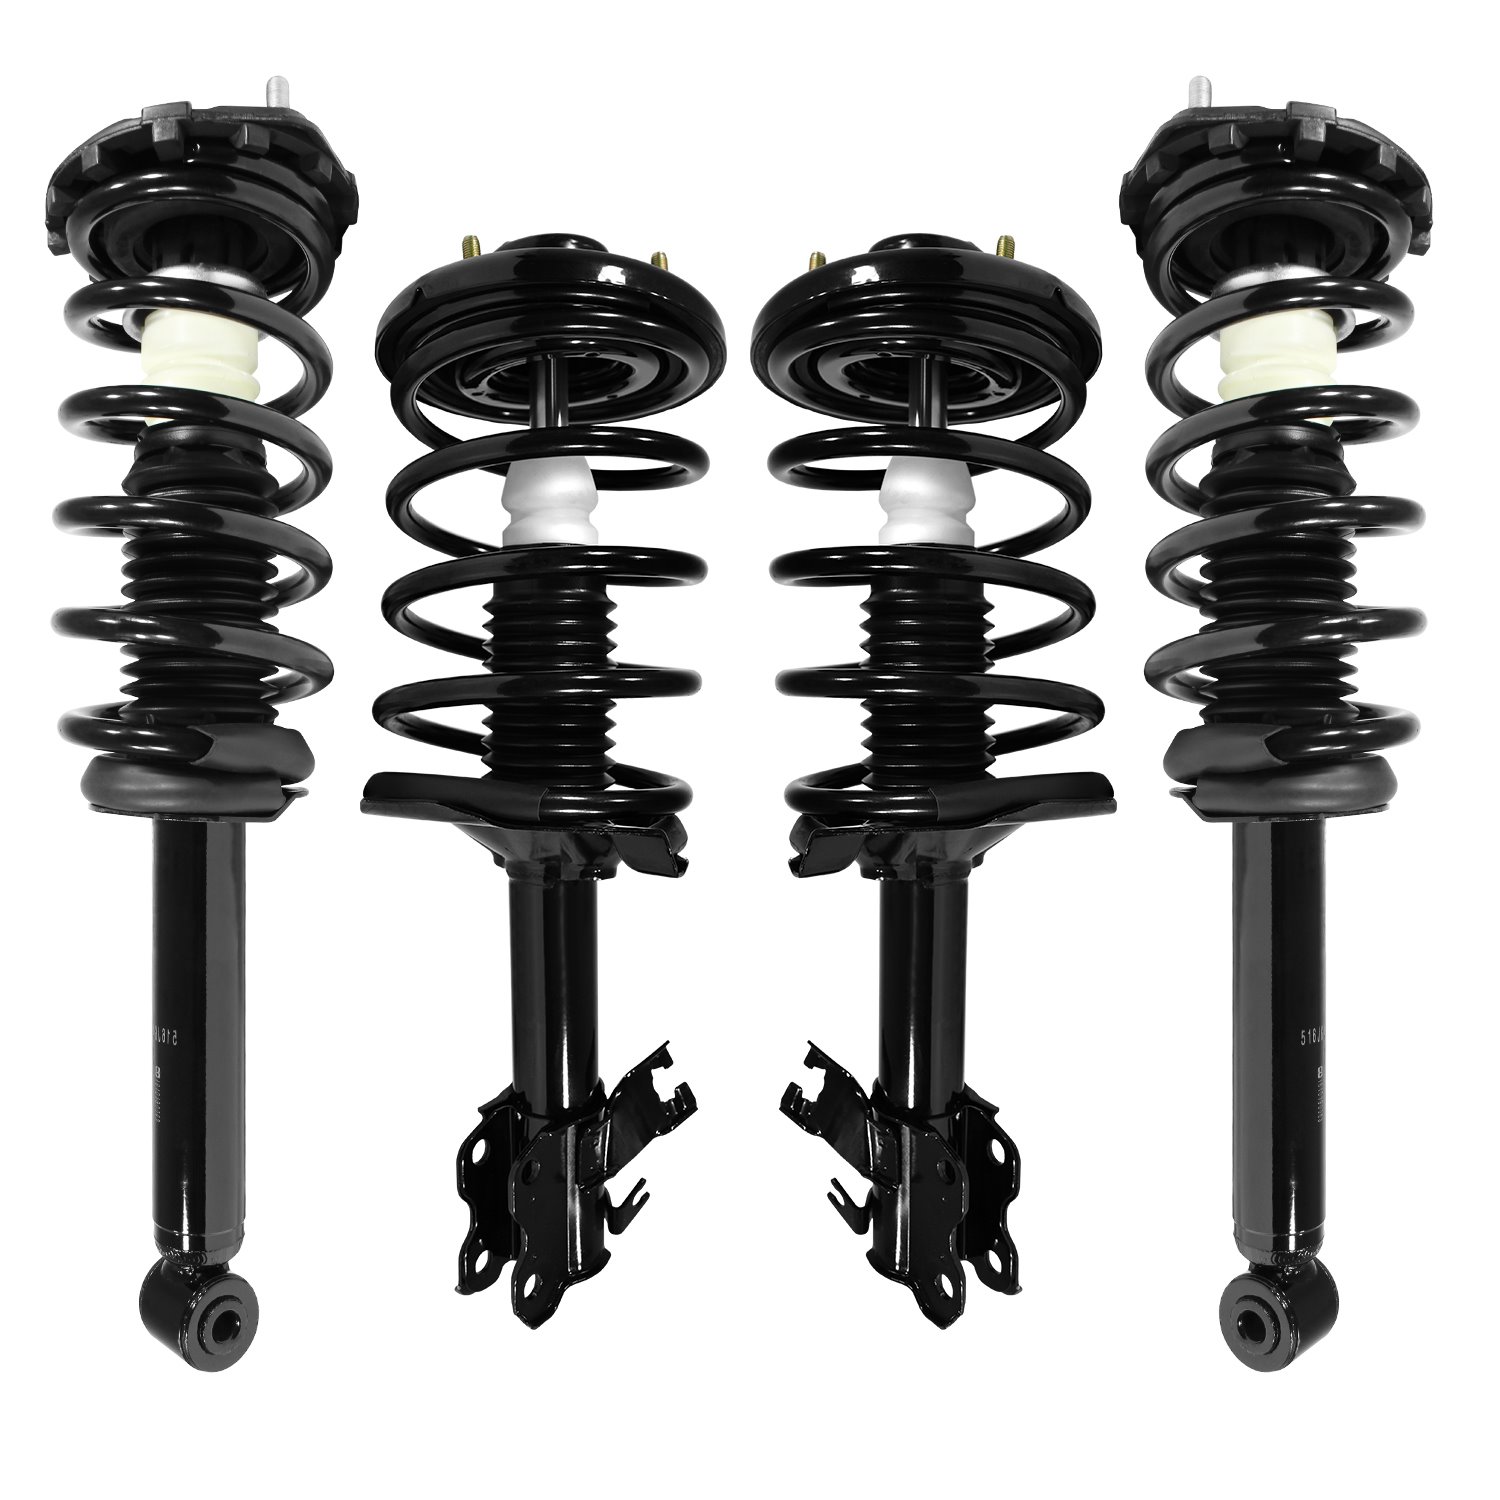 4-11943-15430-001 Front & Rear Suspension Strut & Coil Spring Assembly Kit Fits Select Nissan Maxima, Infiniti I35